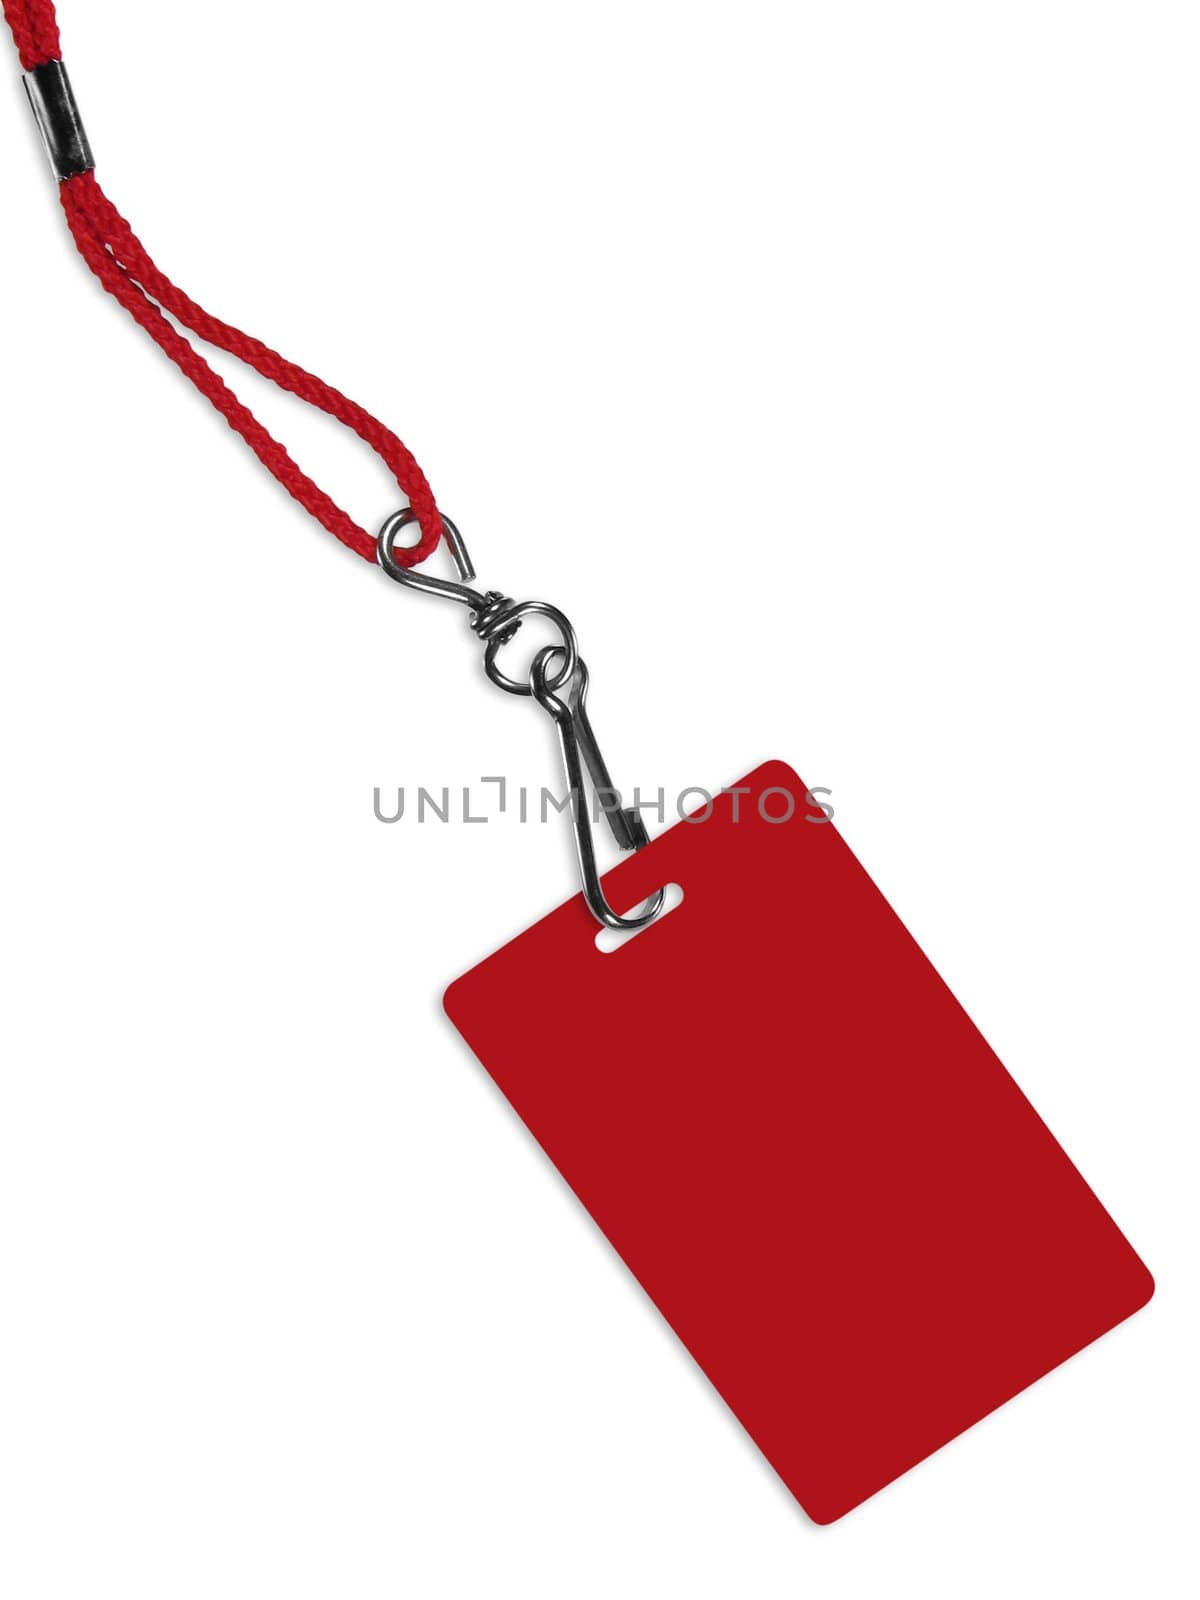 Blank red ID card / badge with copy space, isolated on white. Contains clipping path of the card (without neckband) to change the color of the card.